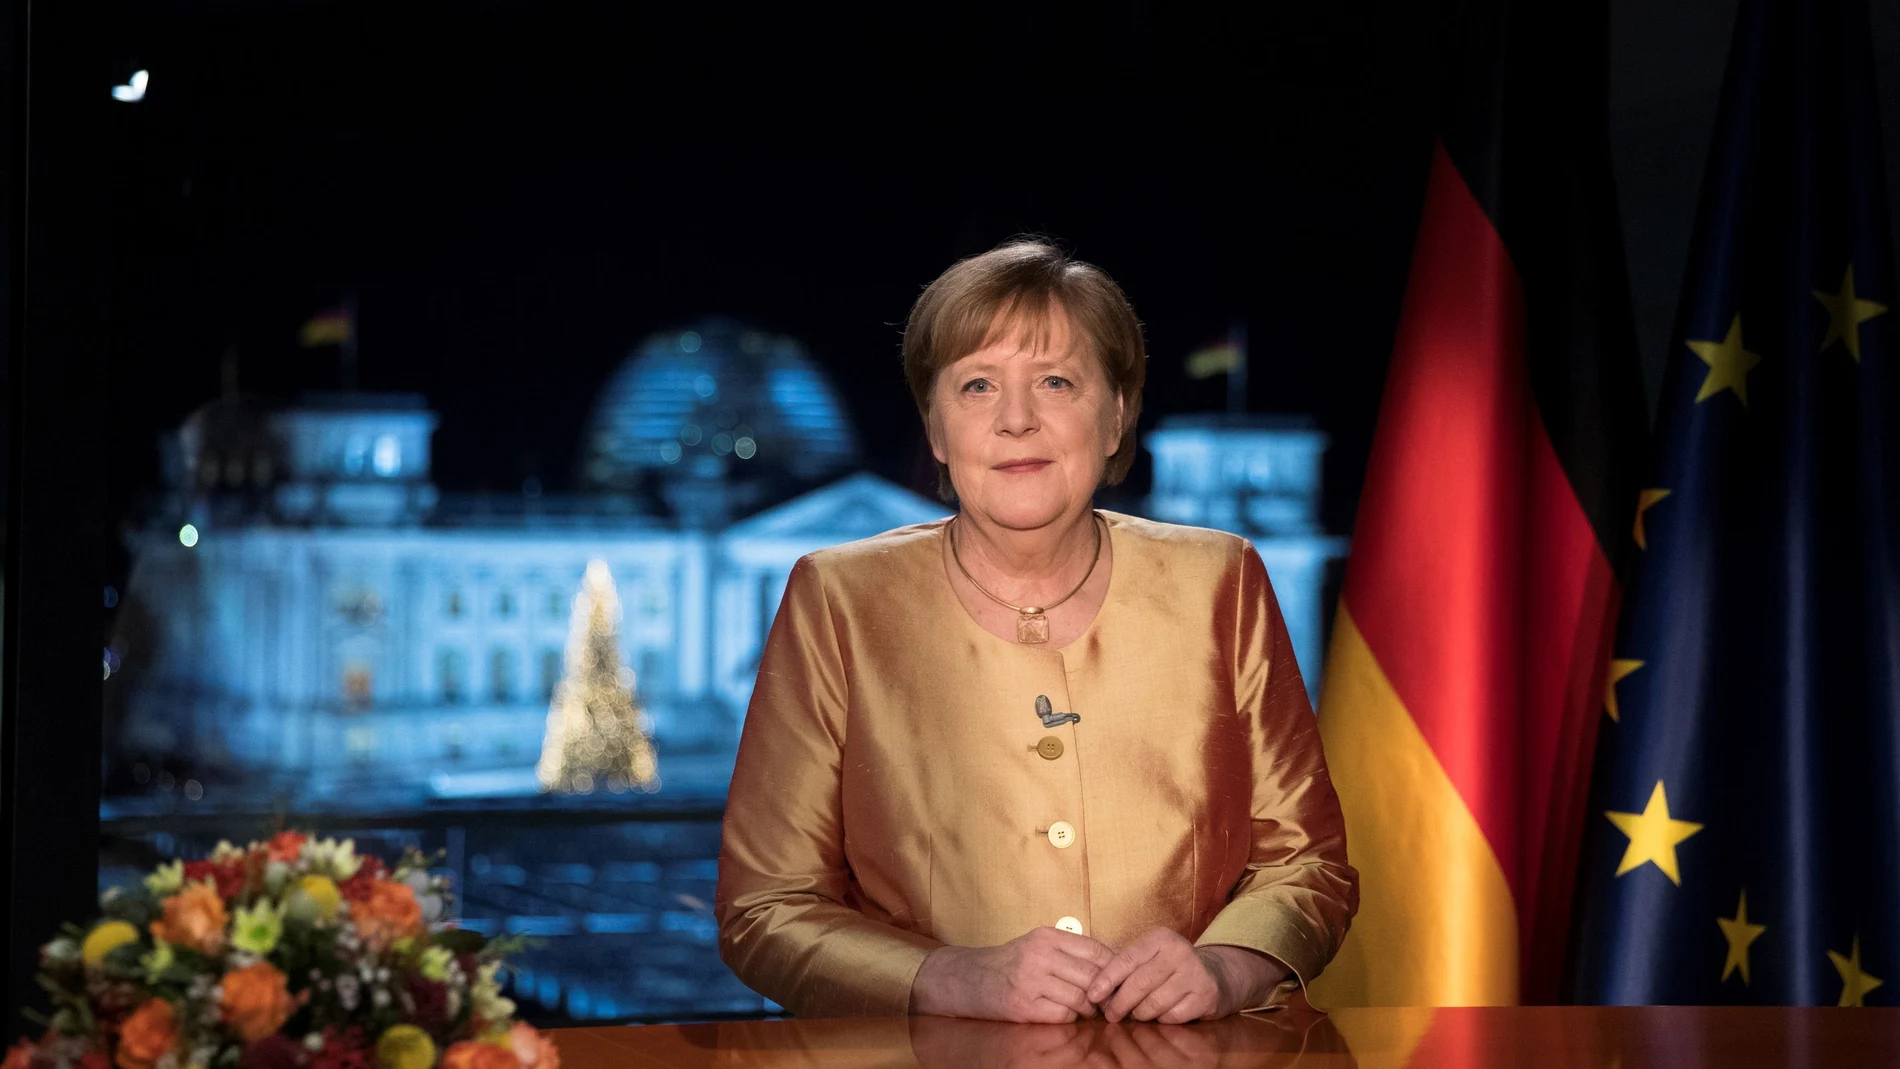 German Chancellor Angela Merkel poses for photographs after the television recording of her annual New Year's speech at the chancellery in Berlin, Germany December 30, 2020. Picture taken December 30, 2020. Markus Schreiber/Pool via REUTERS